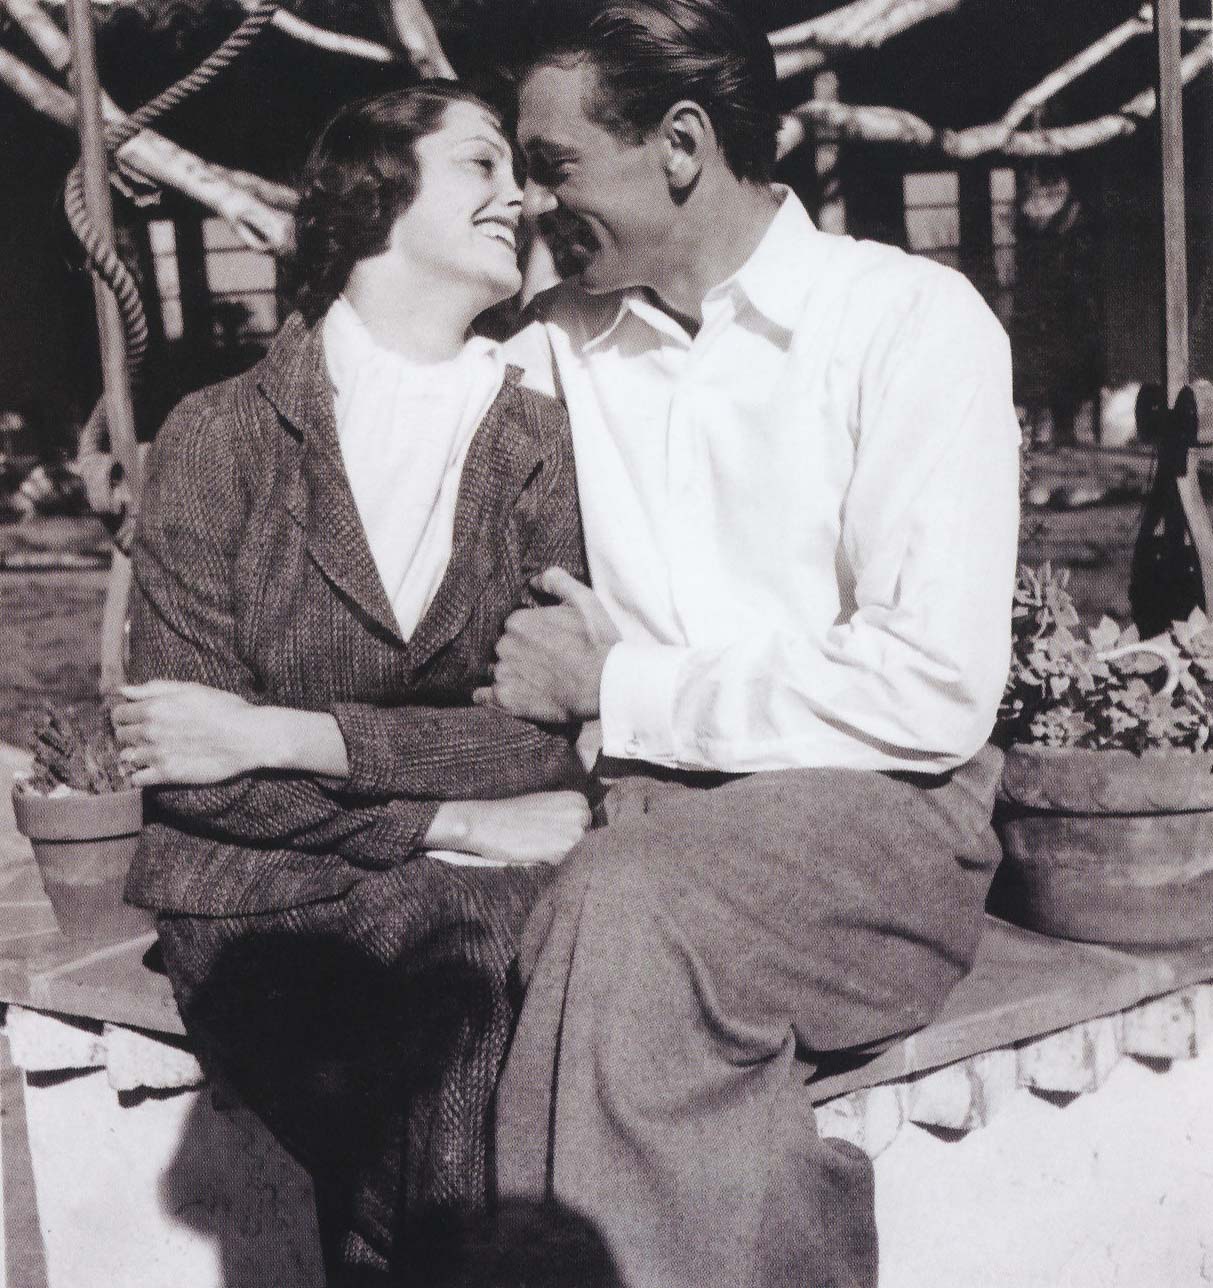 Gary Cooper and his wife Sandra Shaw have an adorable moment in 1934. The couple were married for 28 years right up until his death in 1961.